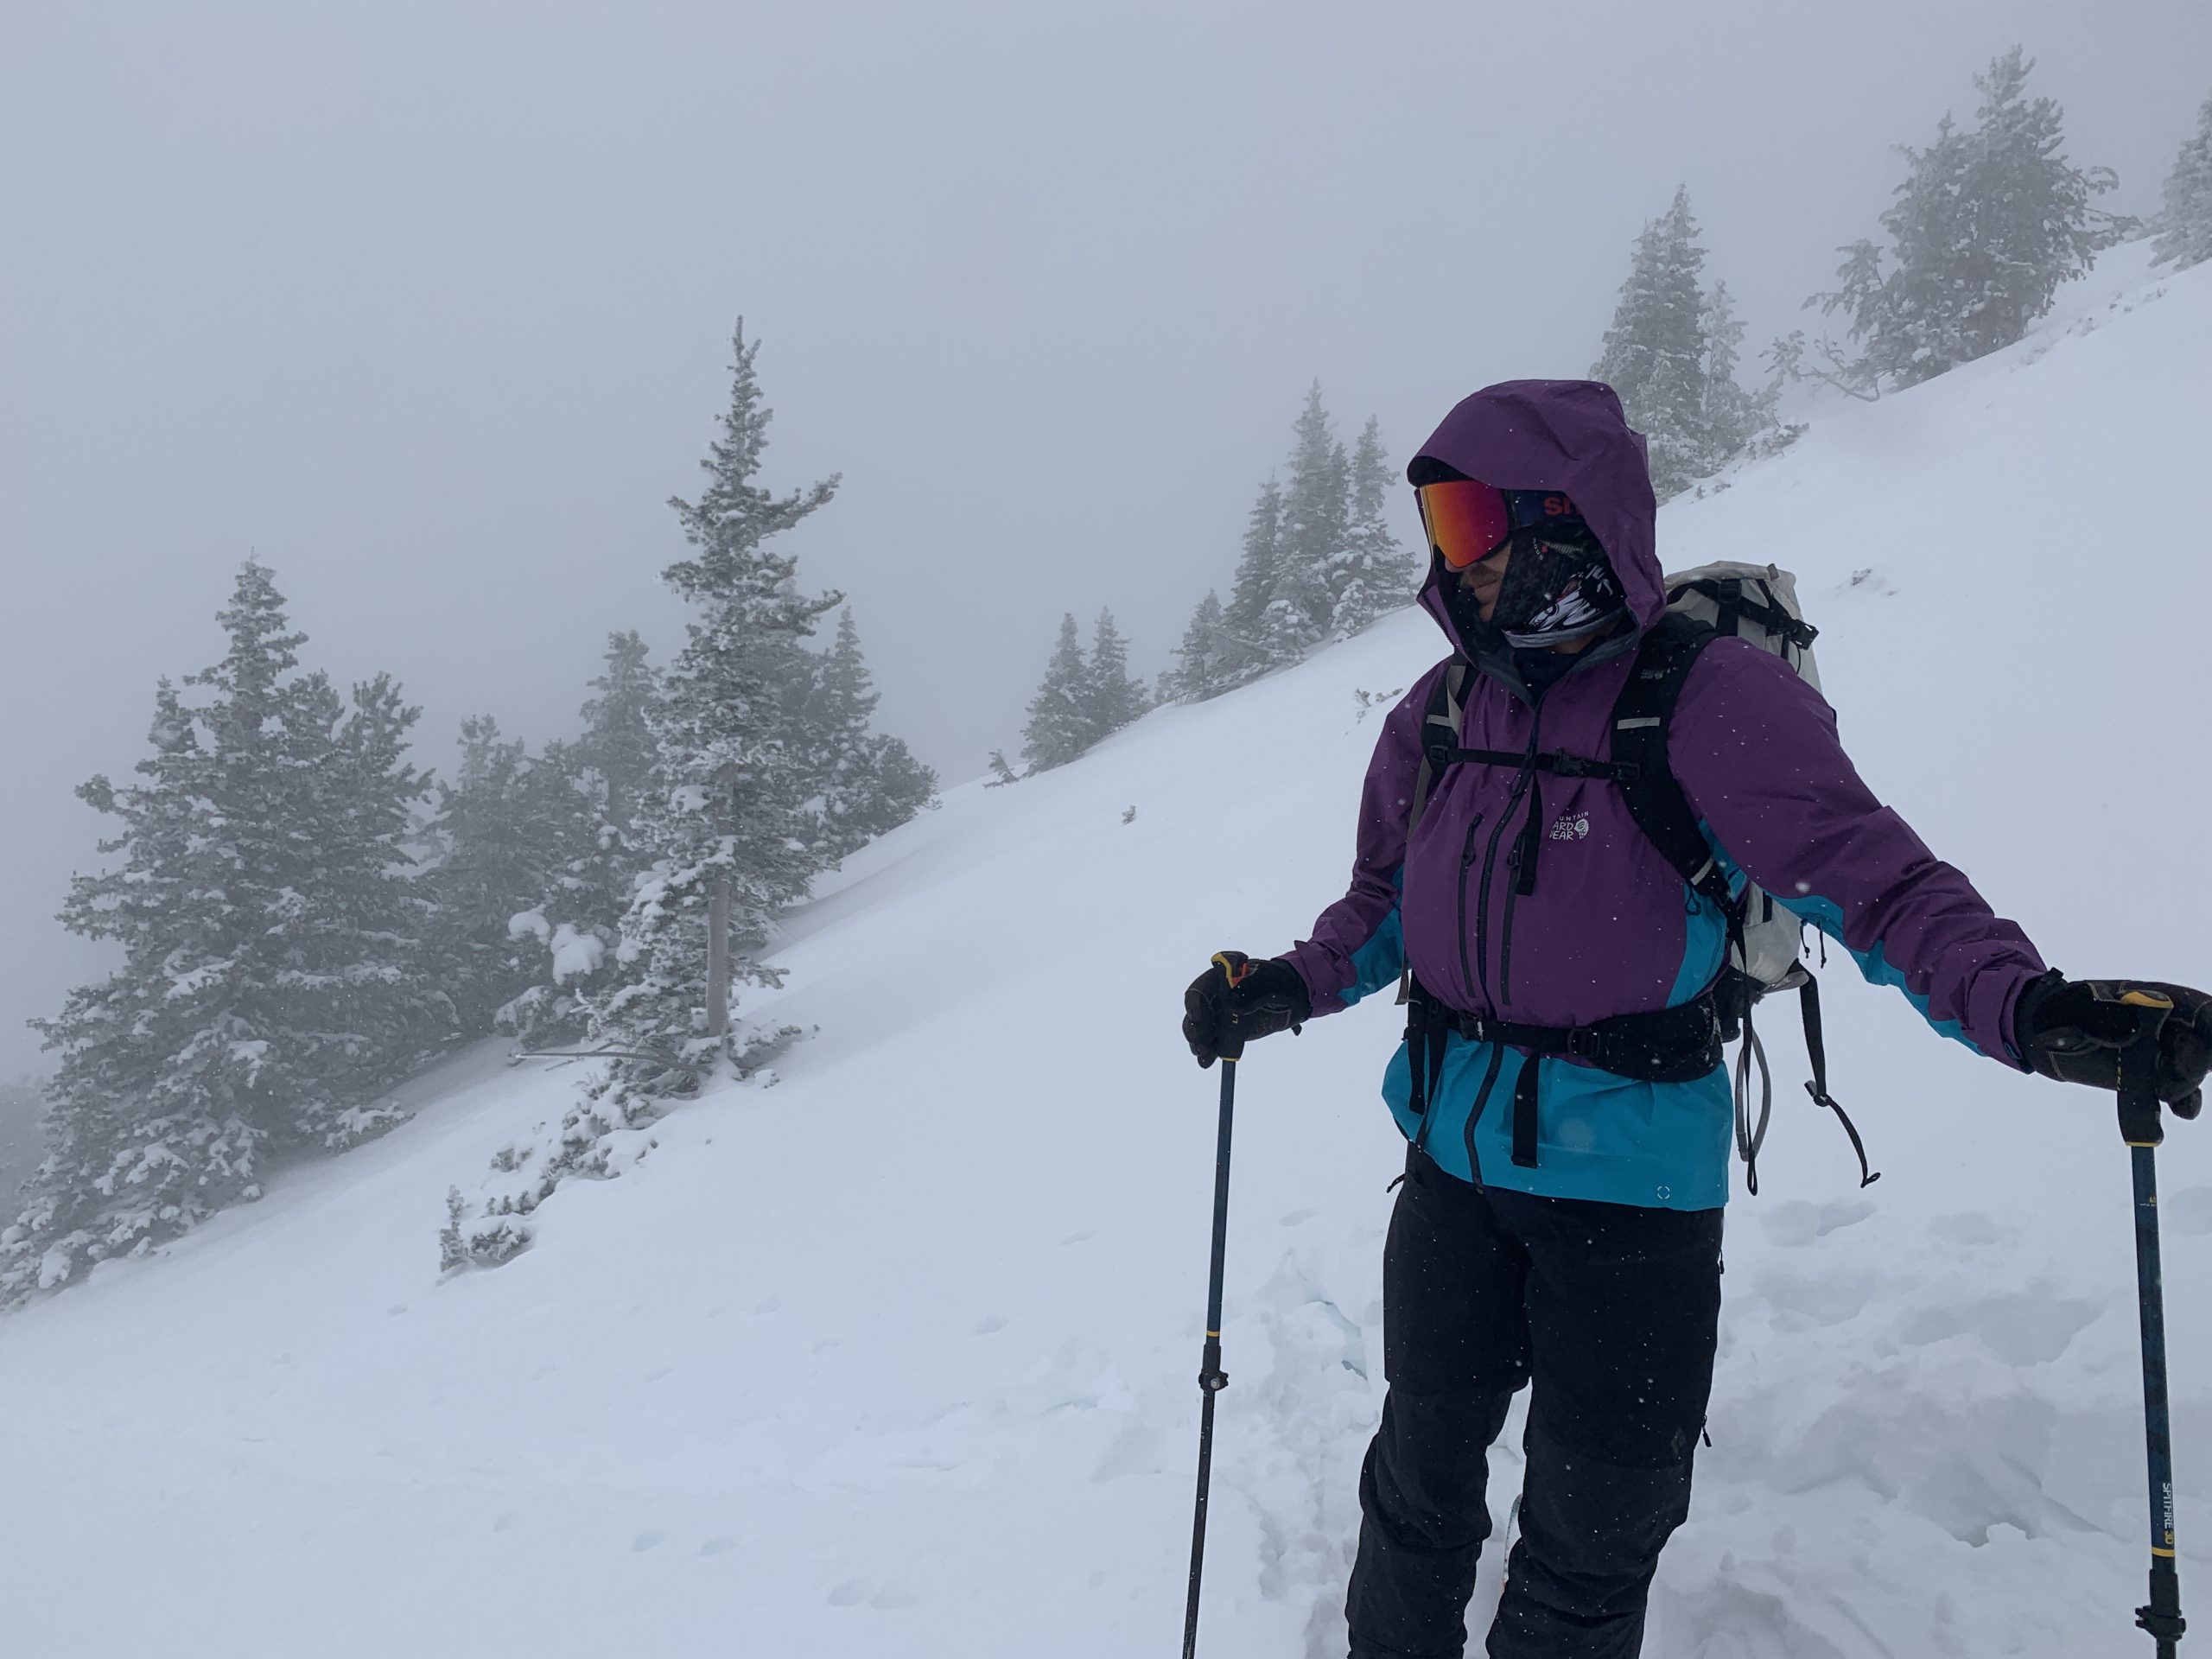 GEAR REVIEW] Why I Chose Mountain Hardwear for My Jacket, Gloves